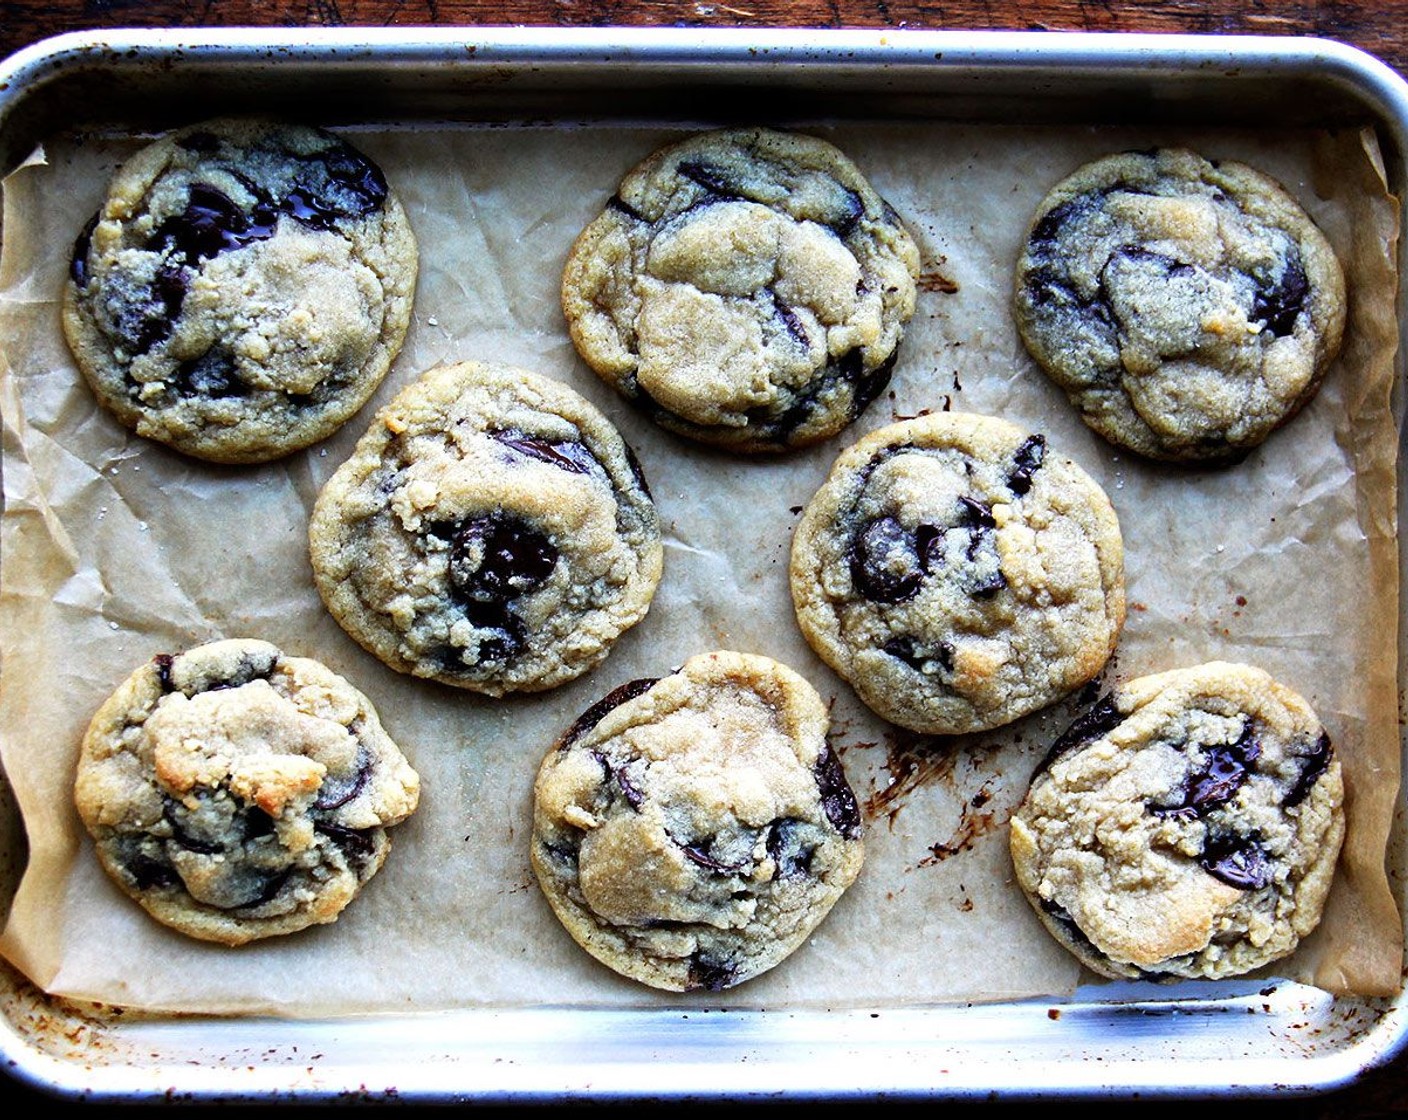 step 6 You want to remove the cookies from the oven when they still look slightly raw—you will think you are removing them too early. The cookies will continue cooking as they sit on the tray out of the oven. Let cookies cool completely on tray before removing.